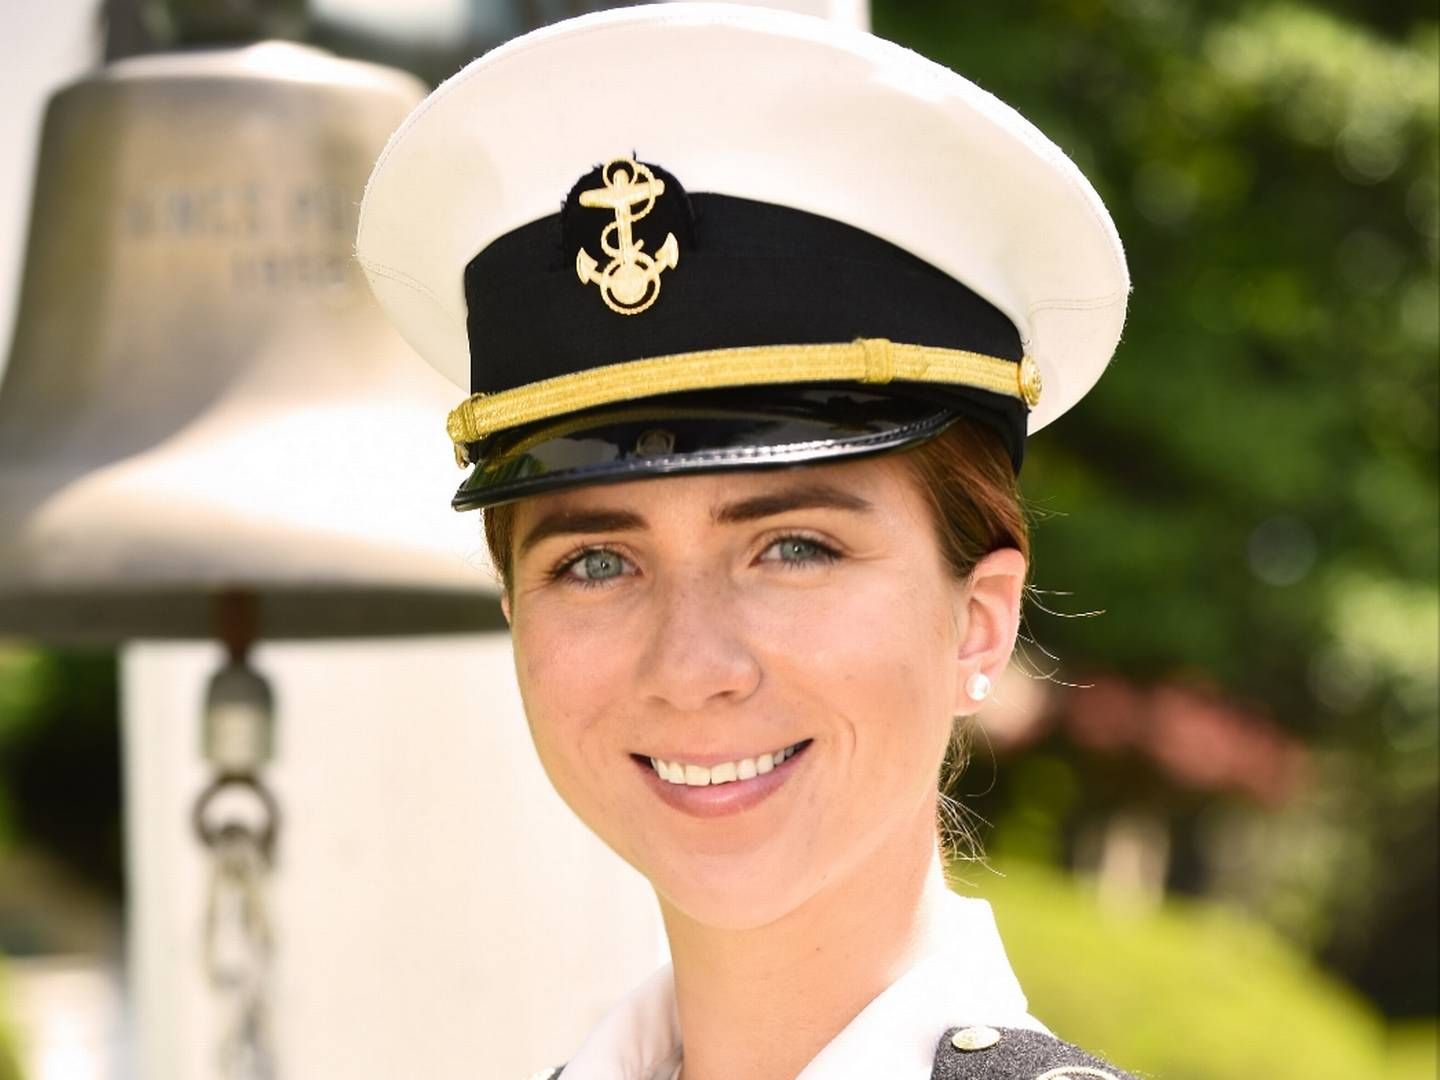 Former naval cadet from Alliance Fairfax tells ShippingWatch that "Gaylan’s allegations about me contained in his lawsuit are disgusting, obviously self-serving, and completely false." | Foto: Maritime Legal Solutions